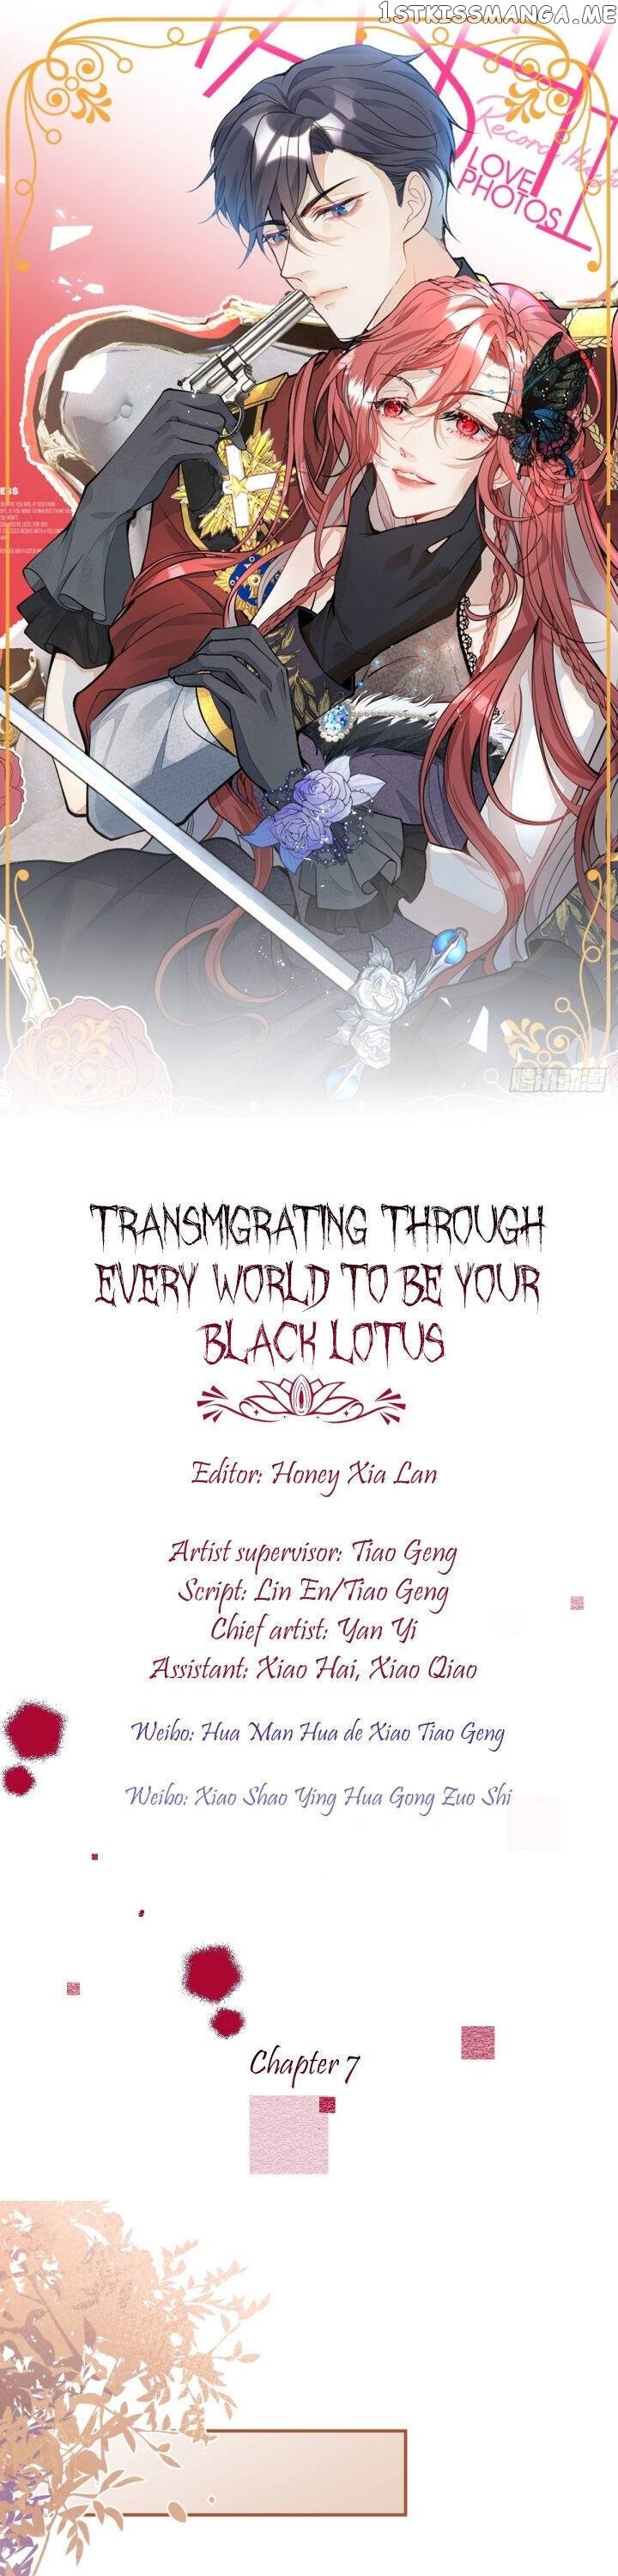 Transmigrating Through Every World To Be Your Black Lotus chapter 7